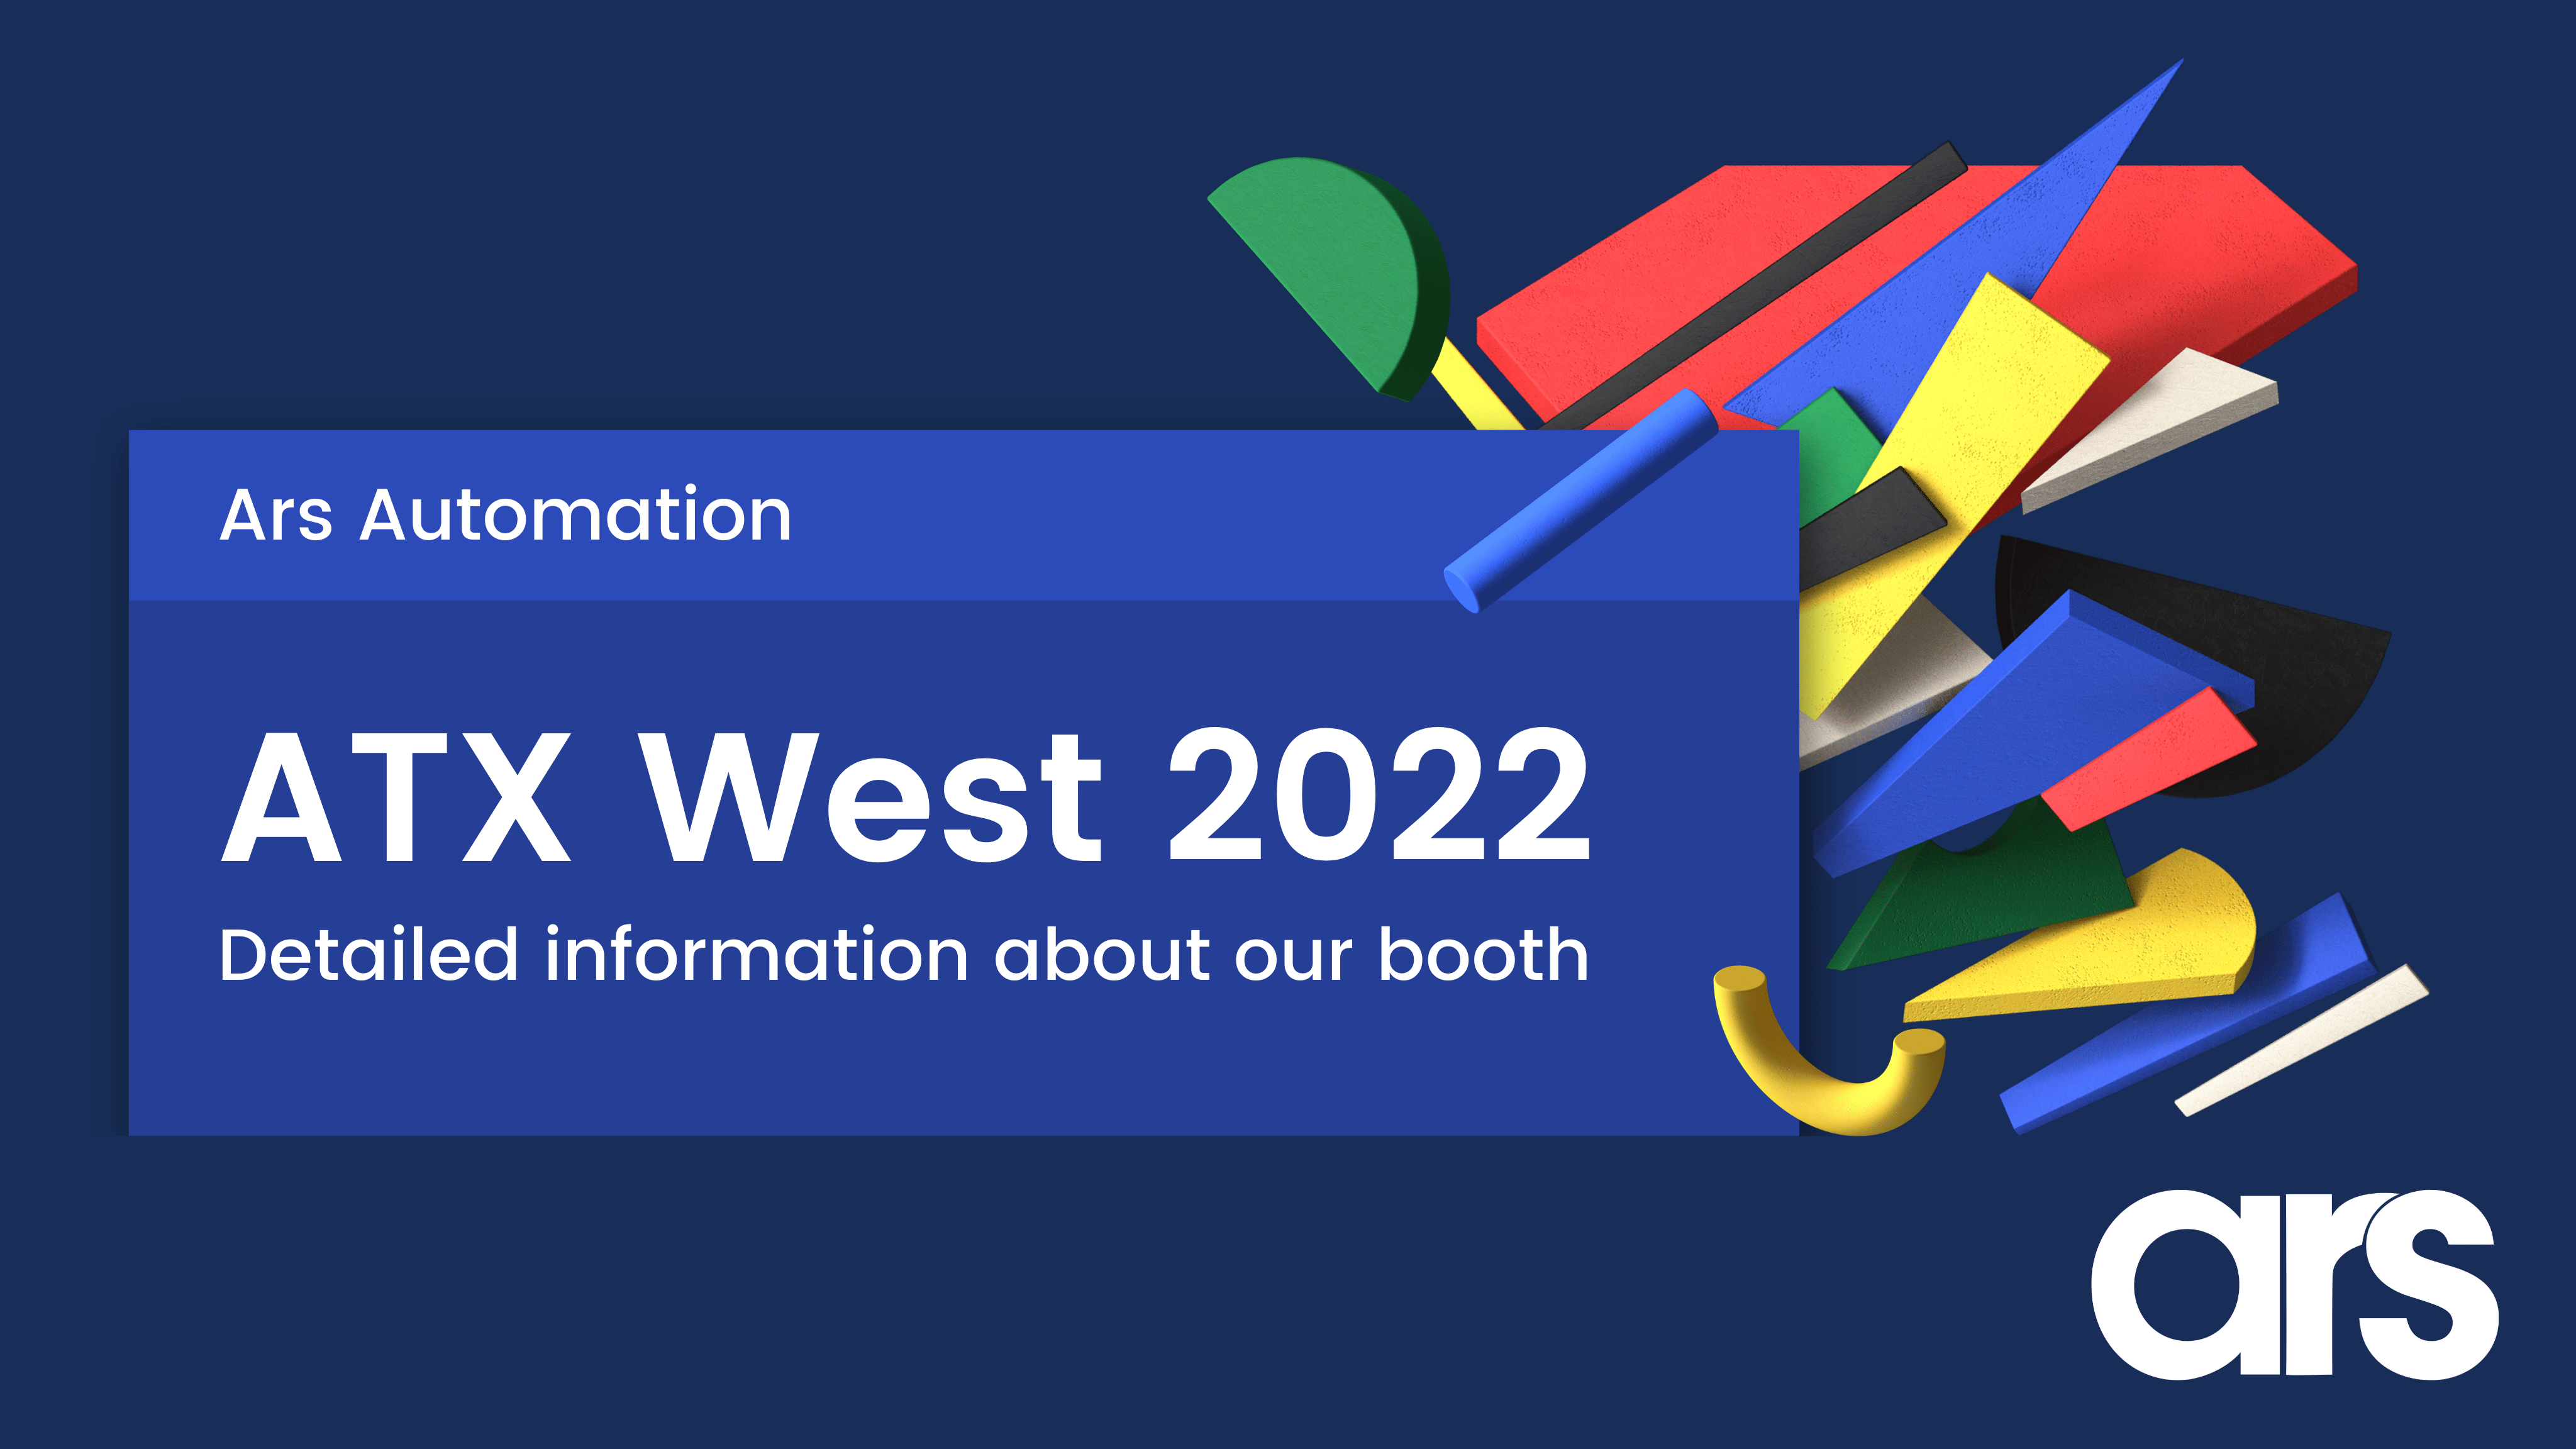 ATX west 2022 automation trade show